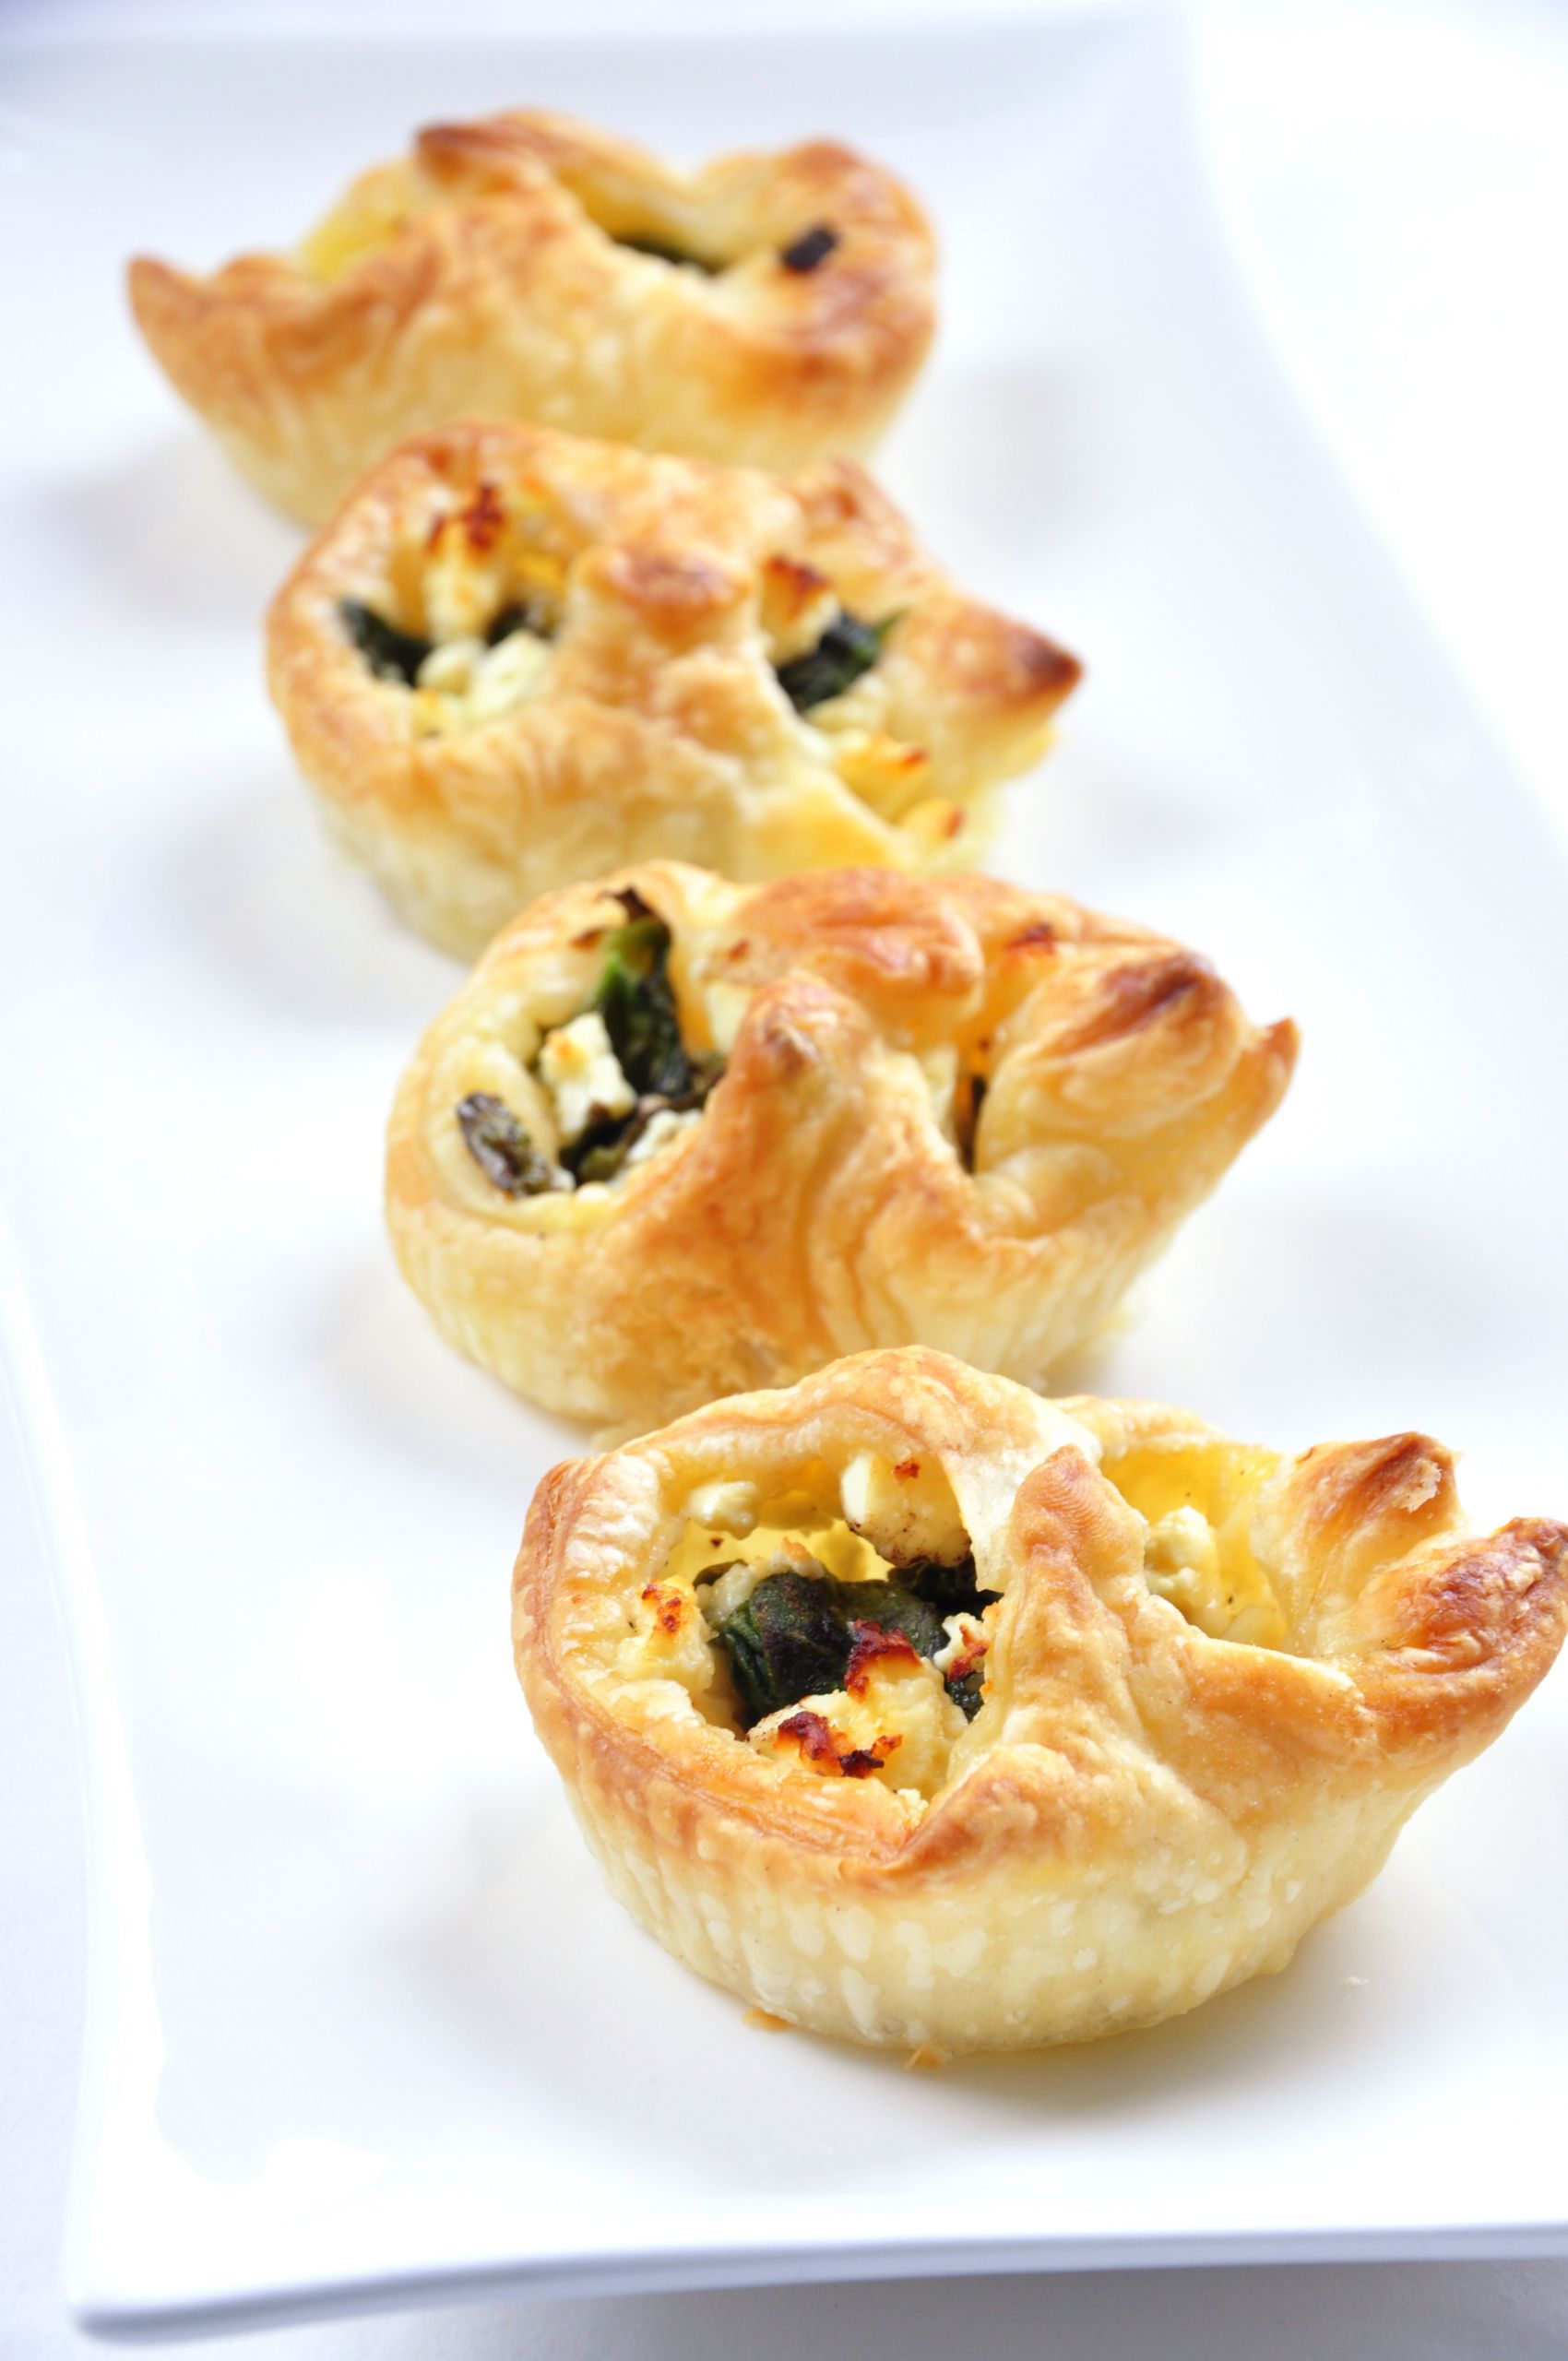 Puff Pastry Appetizers Luxury Puff Pastry Appetizers Sutter buttes Olive Oil Pany